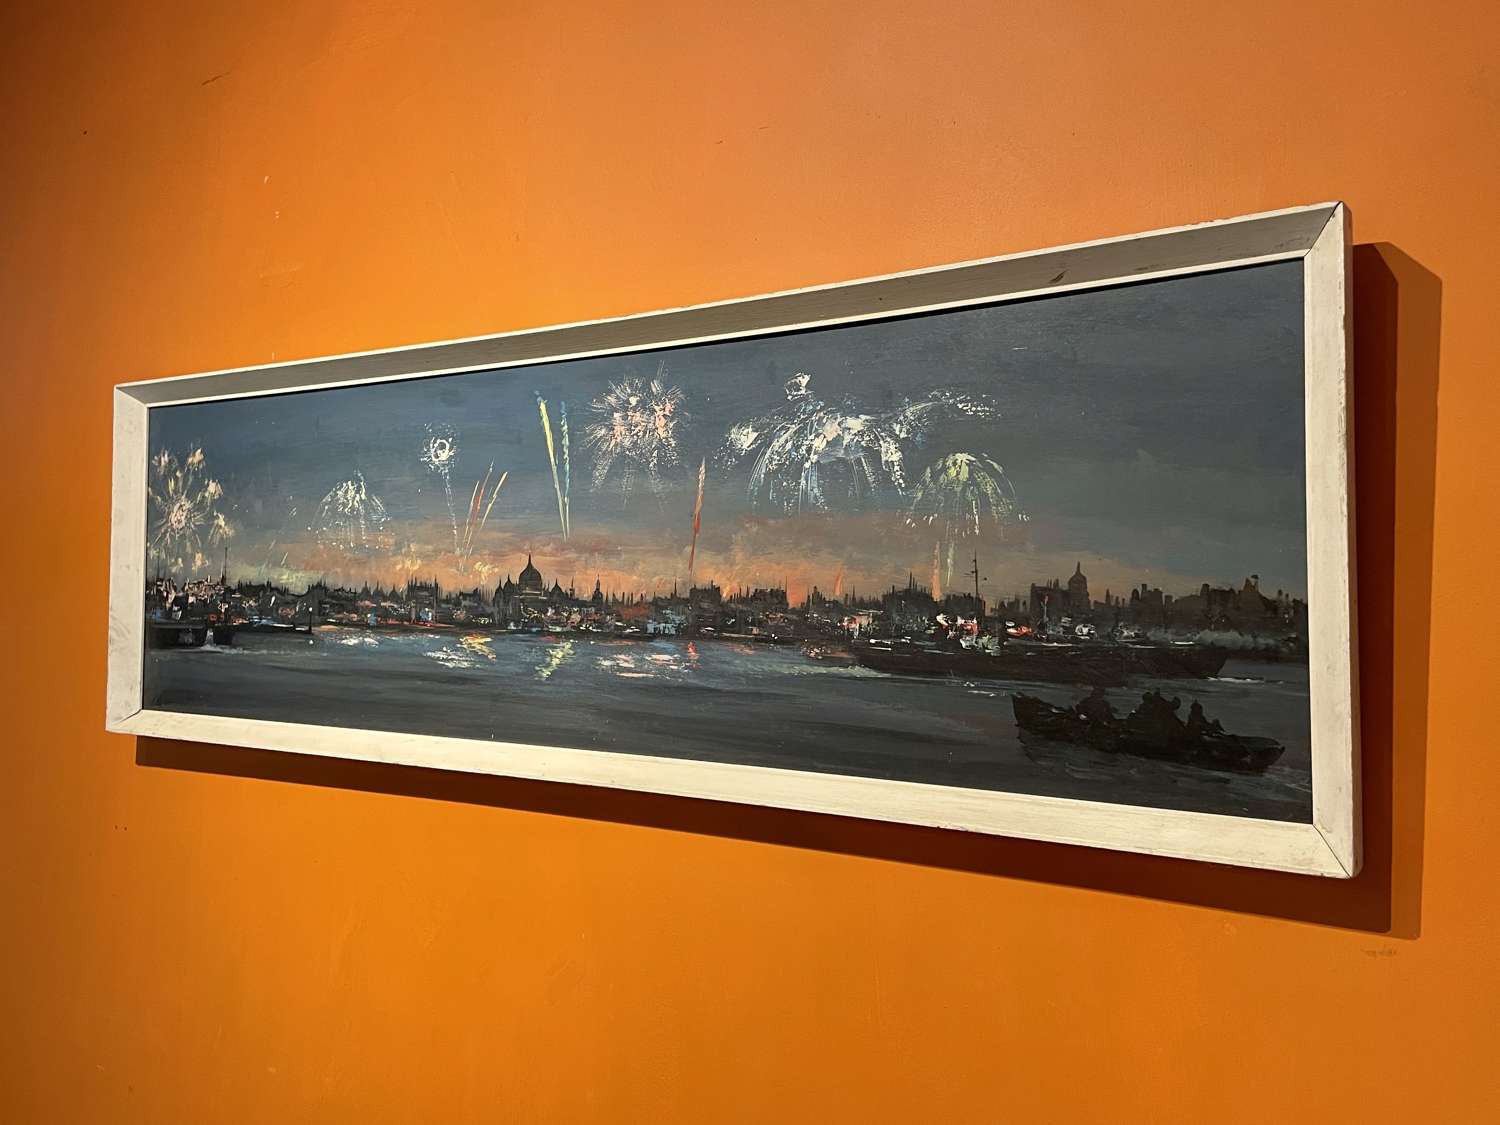 Leonard Kingswood, Panorama of Fireworks over The Thames, Oil on Board